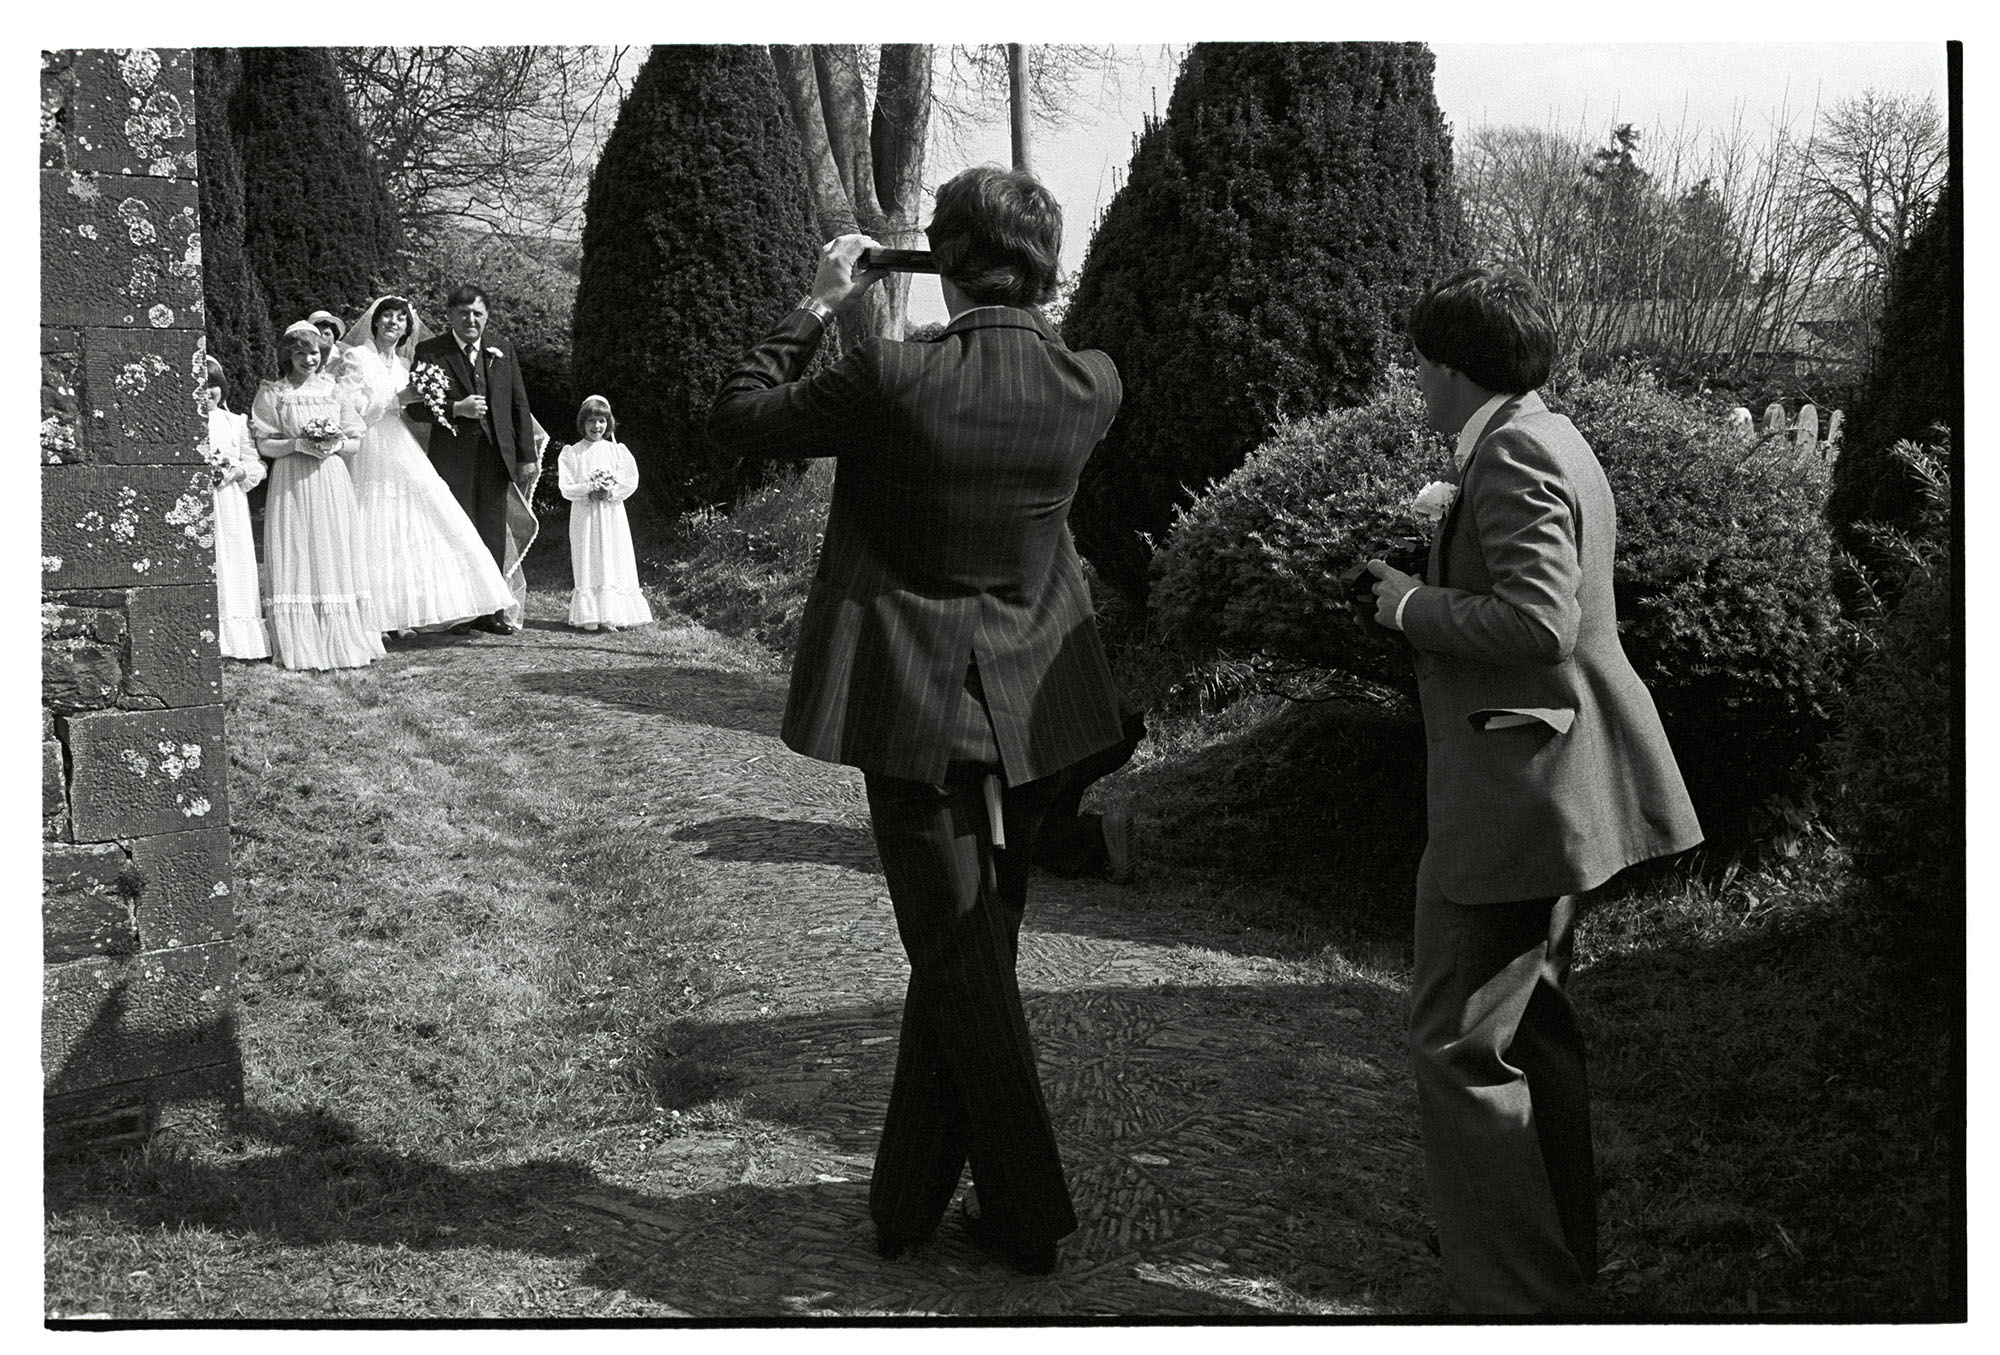 Photographing bridal group. 
[A photographer taking a picture of the bridal party at the wedding of Janet Gooch and Keith Sullivan in Merton churchyard.]